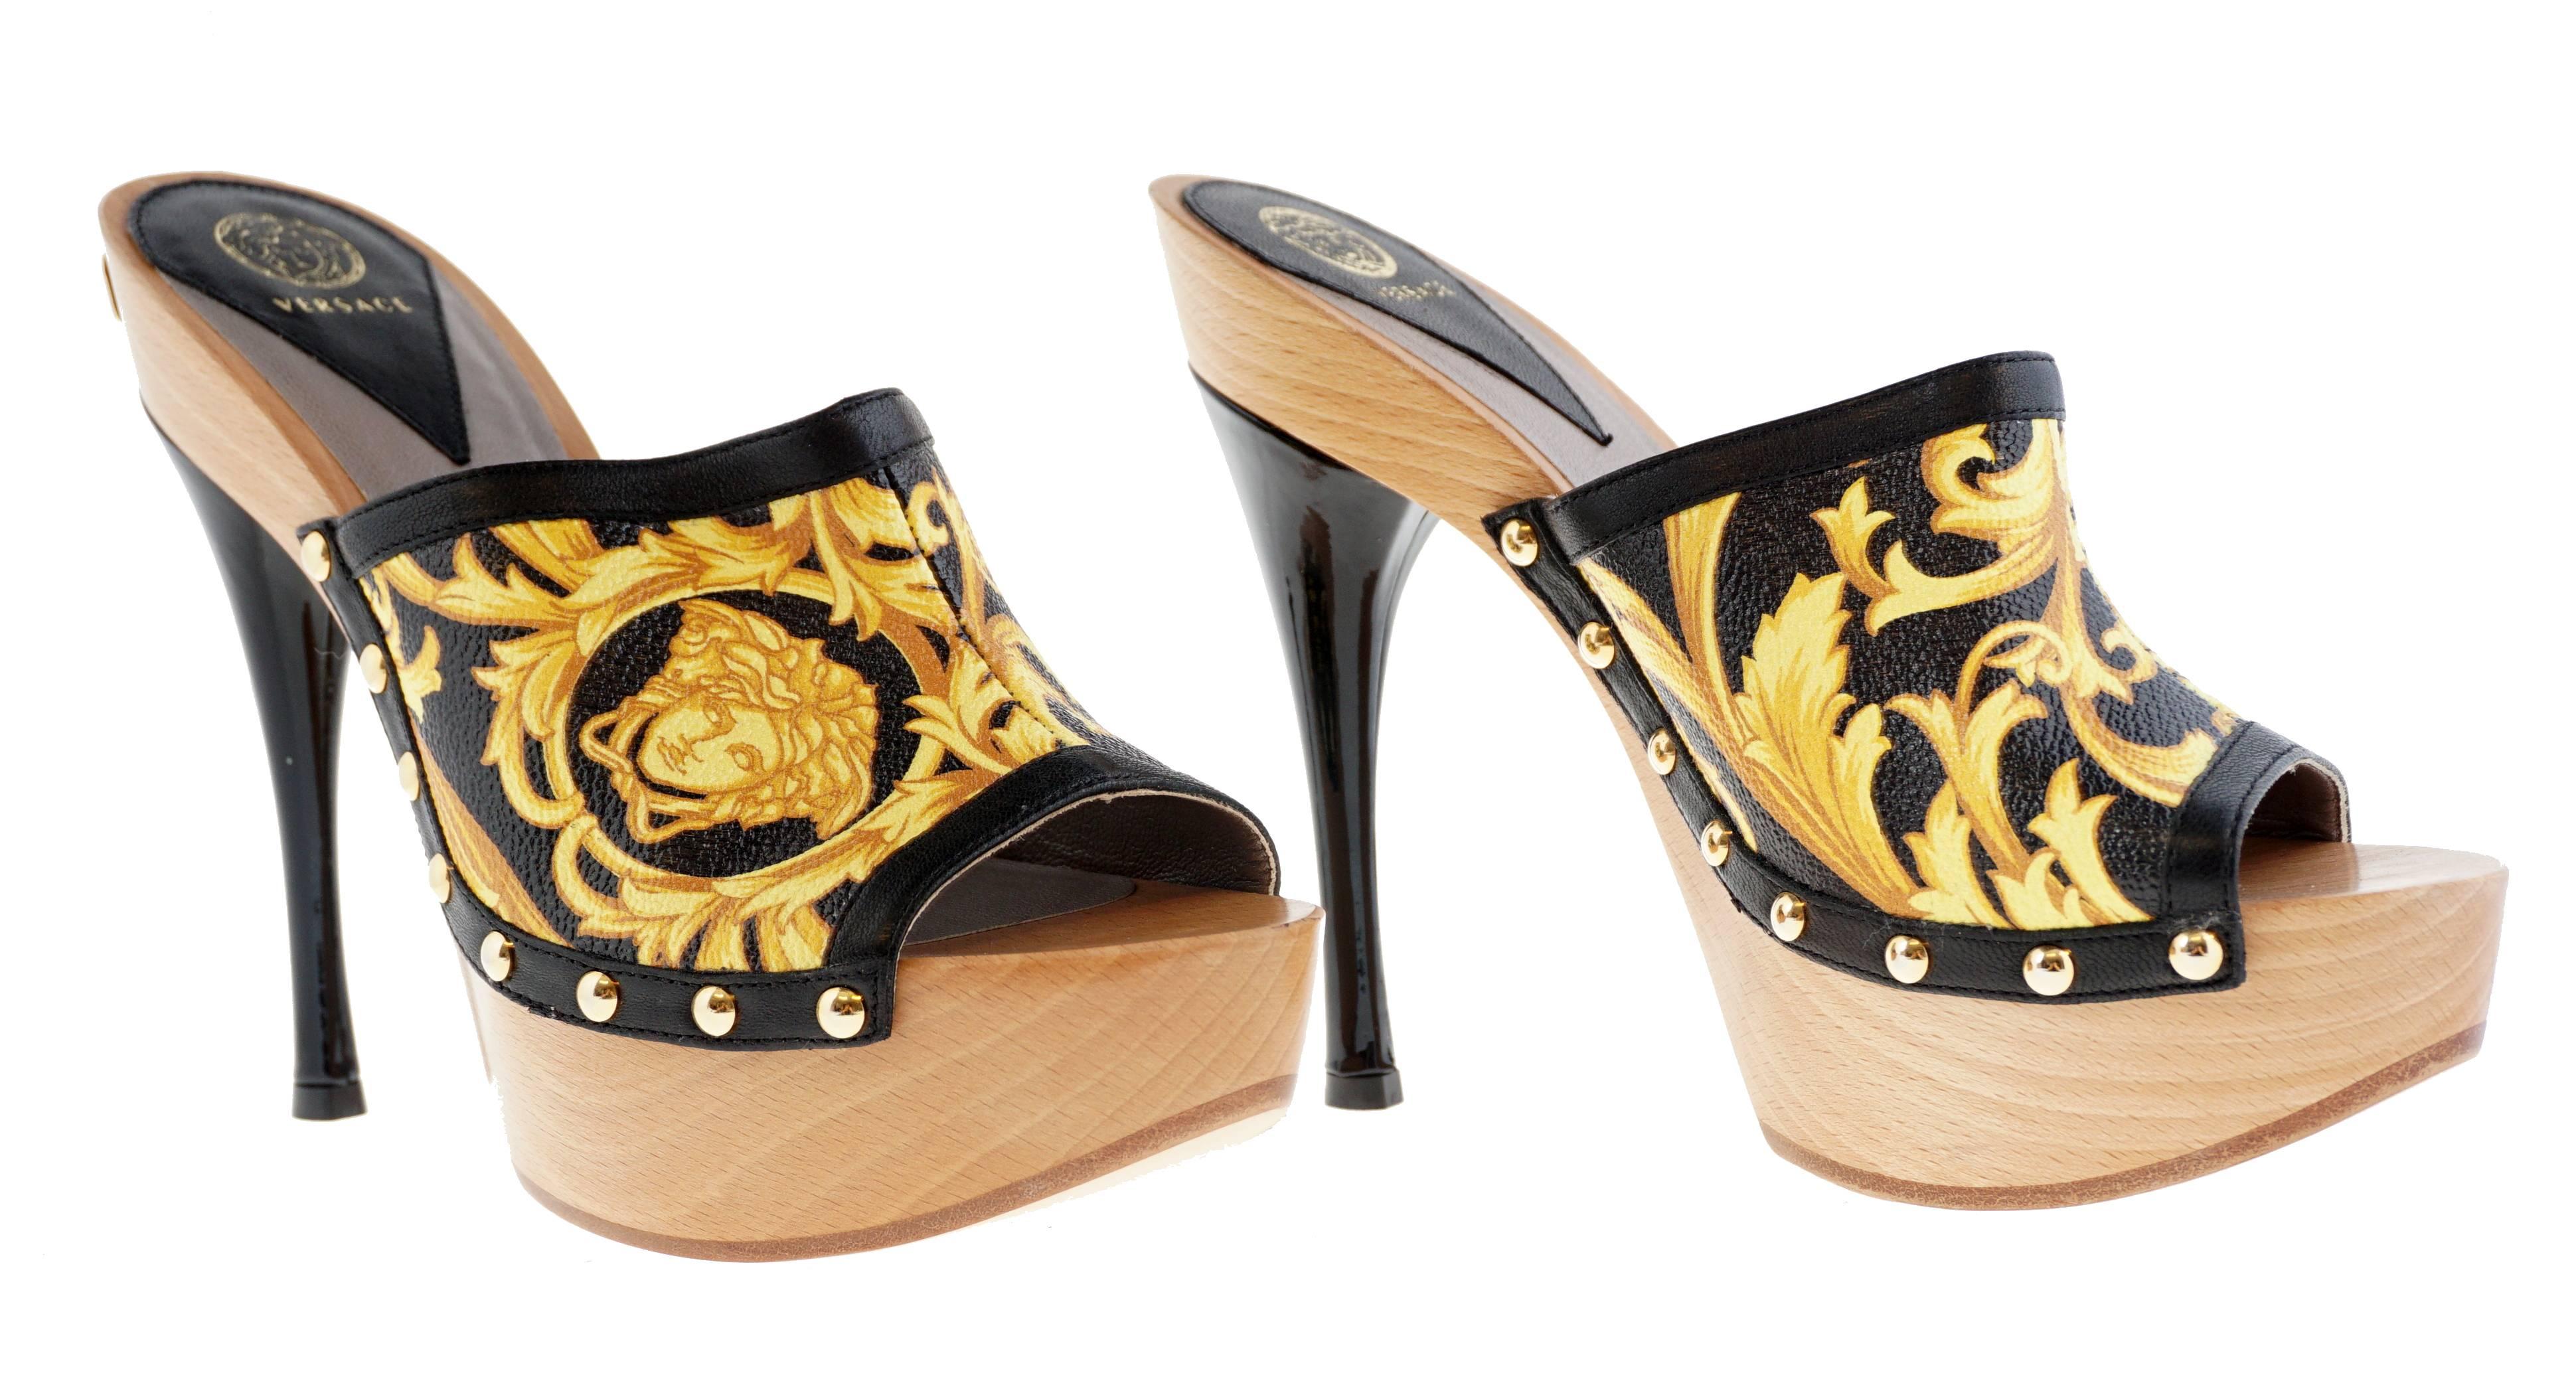 VERSACE 

Turn heads on vacation in these iconic Barocco high-heeled clog sandals.

Leather sole.

Leather: Calfskin.

Made in Italy.

Measurements:

Heel: 5.5 in / 140 mm

Platform: 2 in / 50 mm
 
IT Size 37.5 - US 7.5

Made in